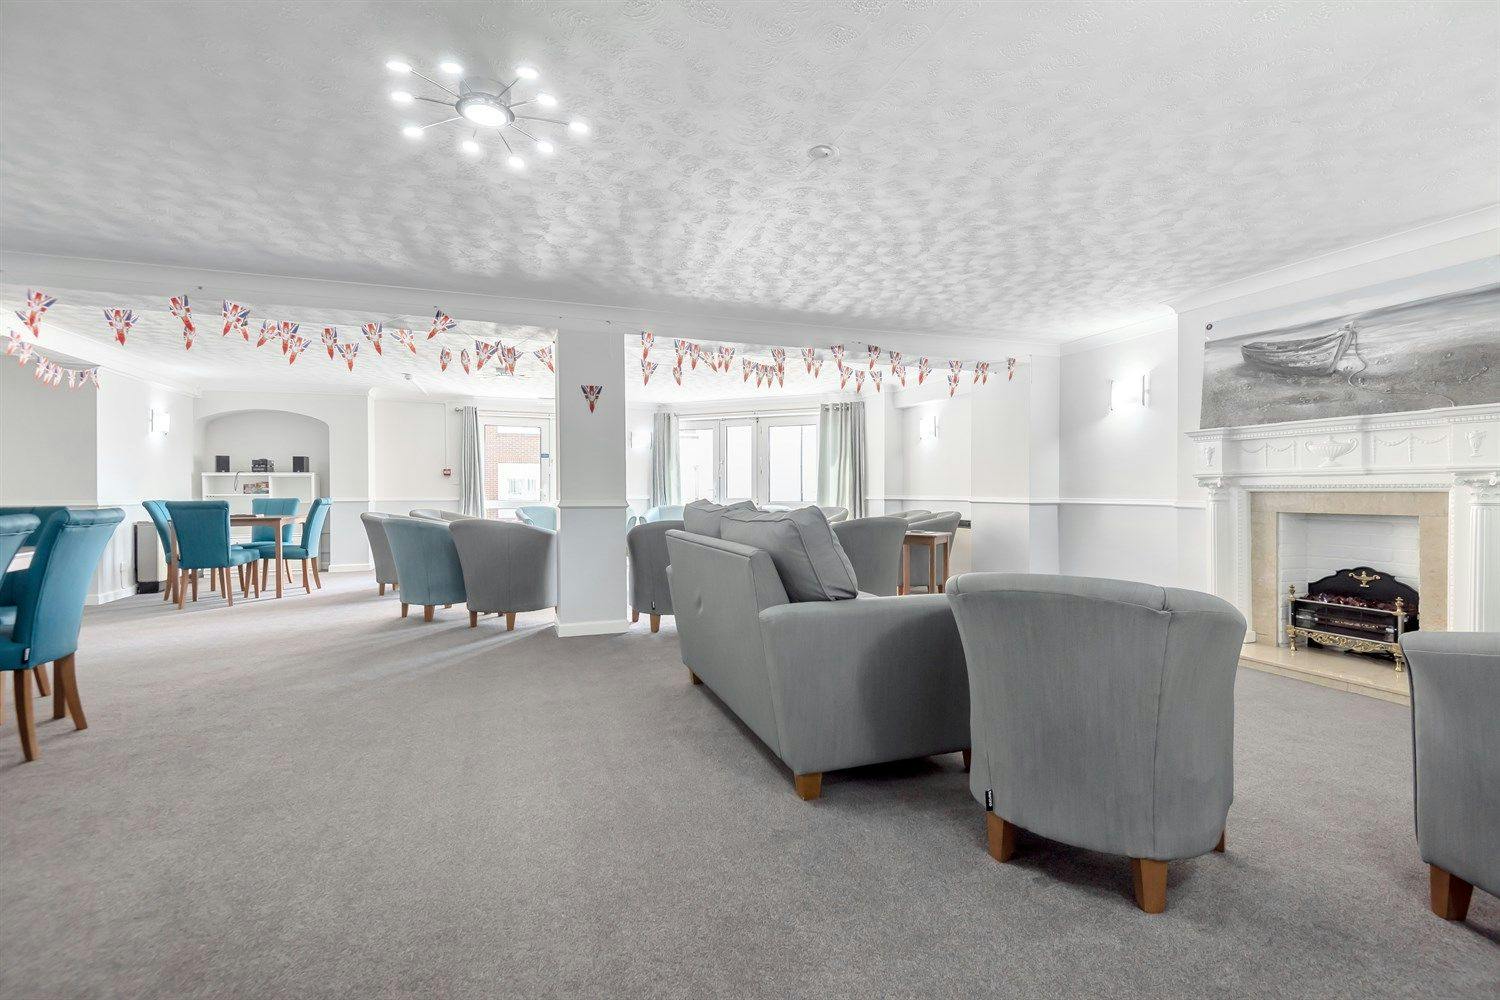 Communal Lounge at Homecove House Retirement Development in Southend-on-Sea, Essex